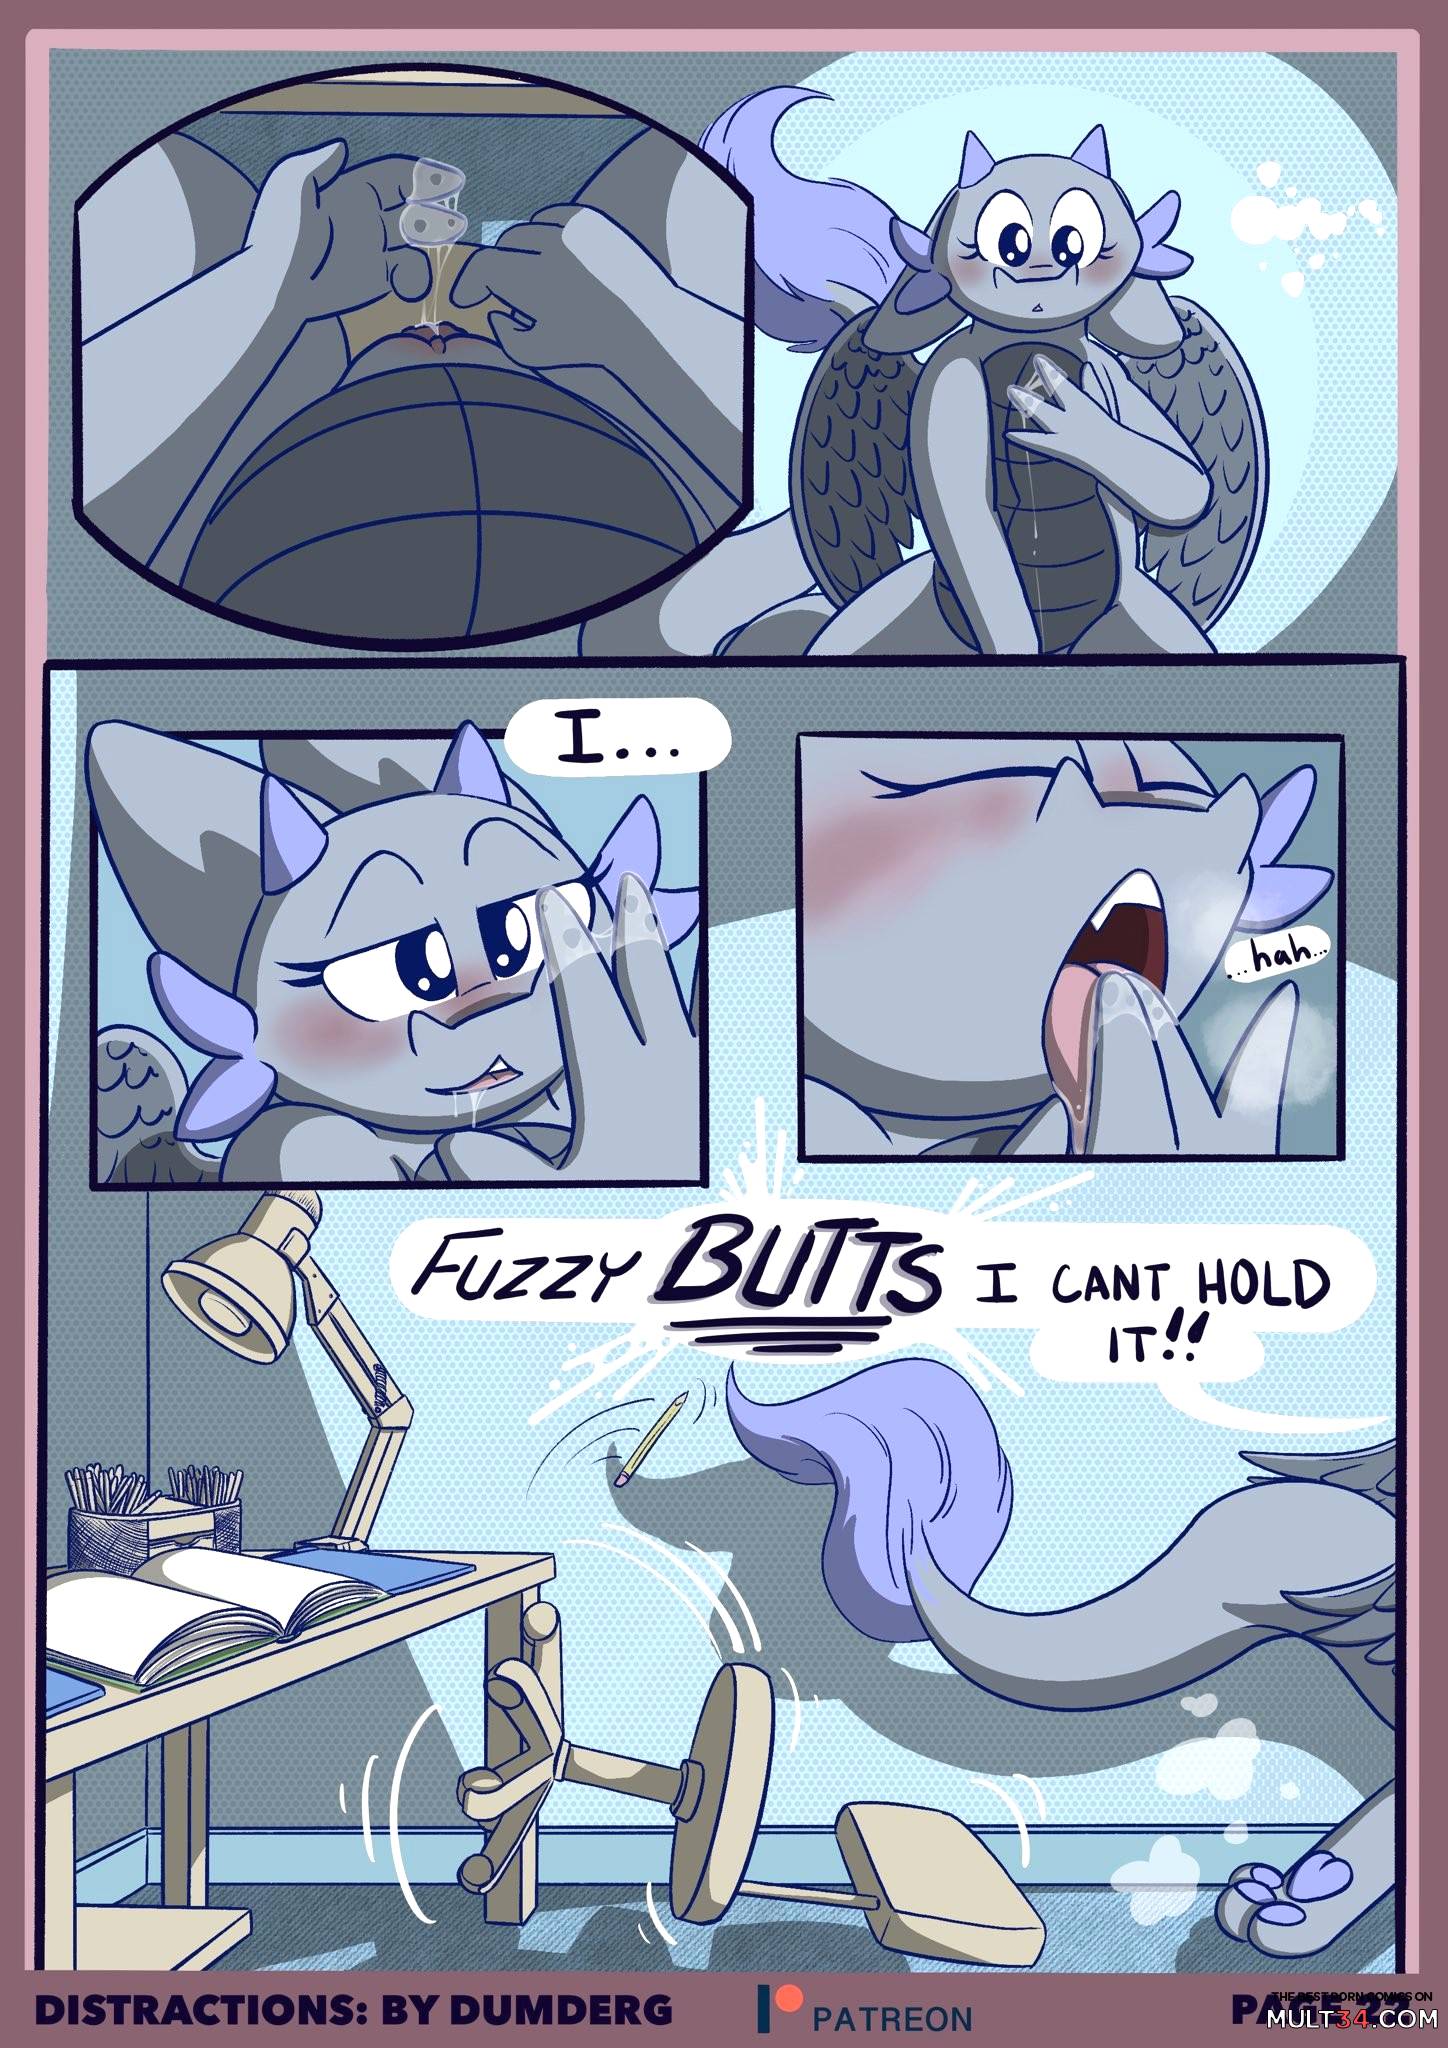 Distractions - DumDerg page 23